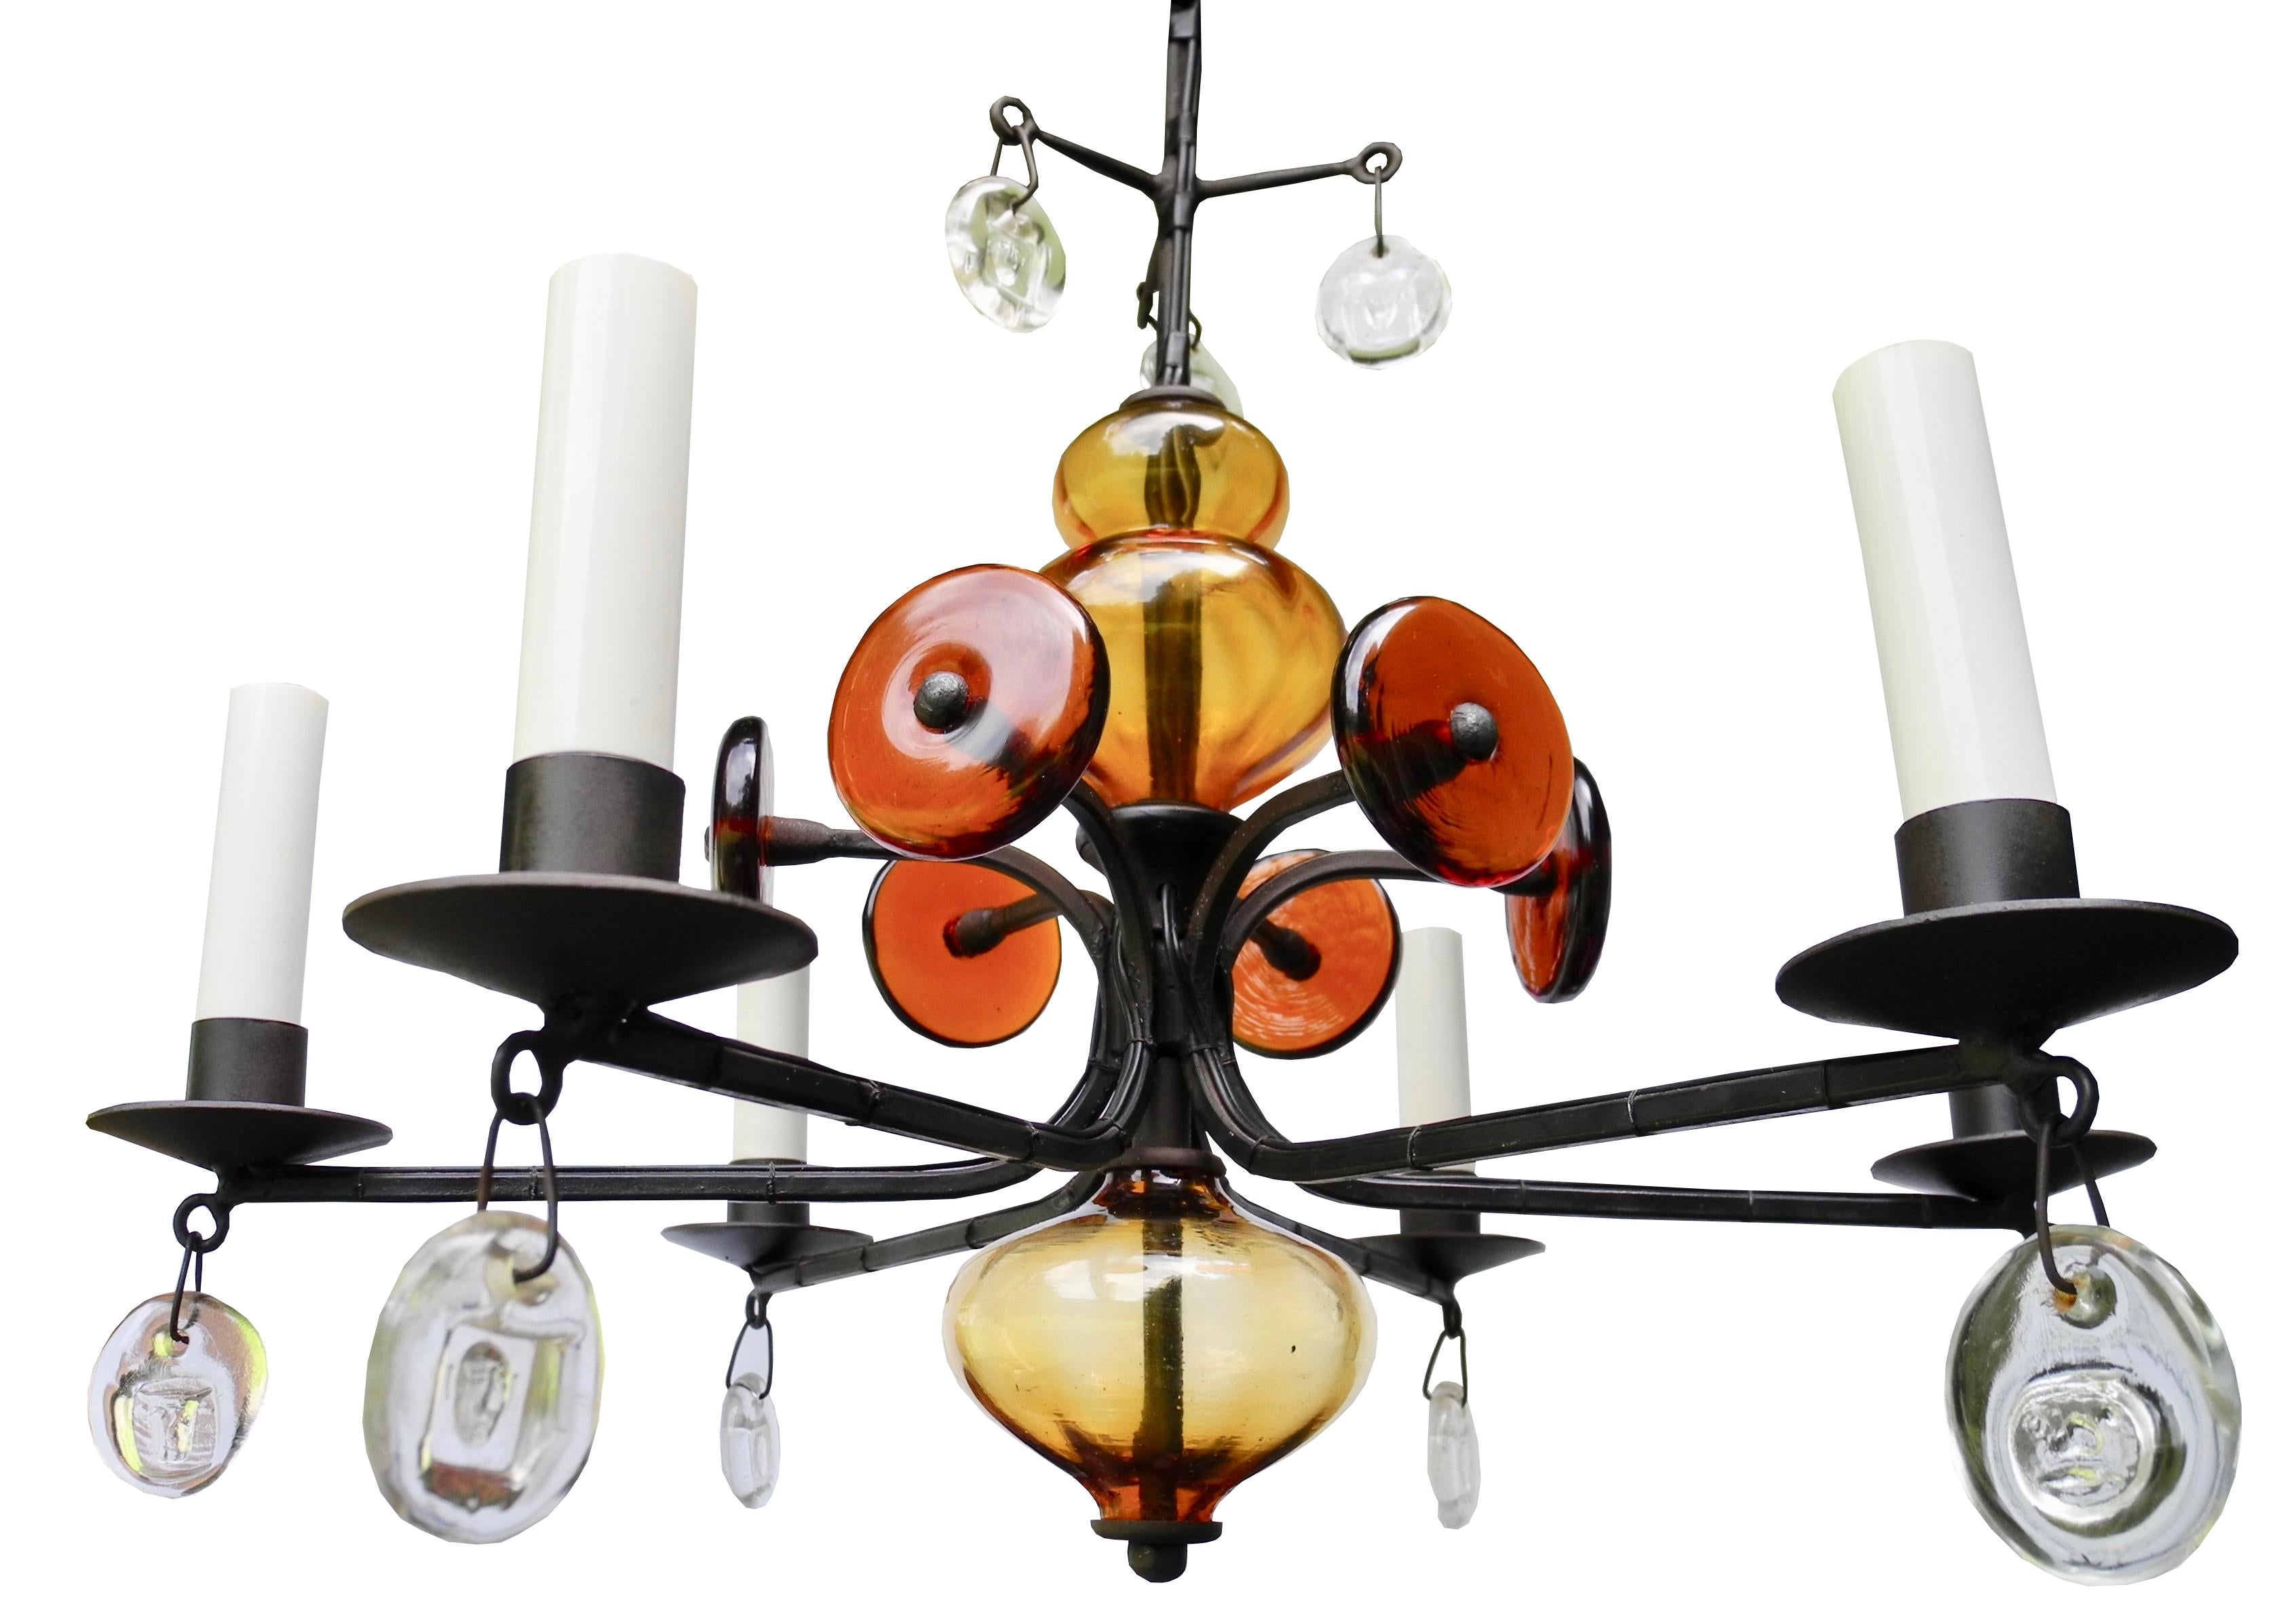 This original Kosta Boda chandelier was designed by Eric Hoglund. This candelabrum is factory electrified for light bulbs. Made of hand forged wrought iron and hand blown glass. The hanging drop glass is clear and the interior glass is dark and